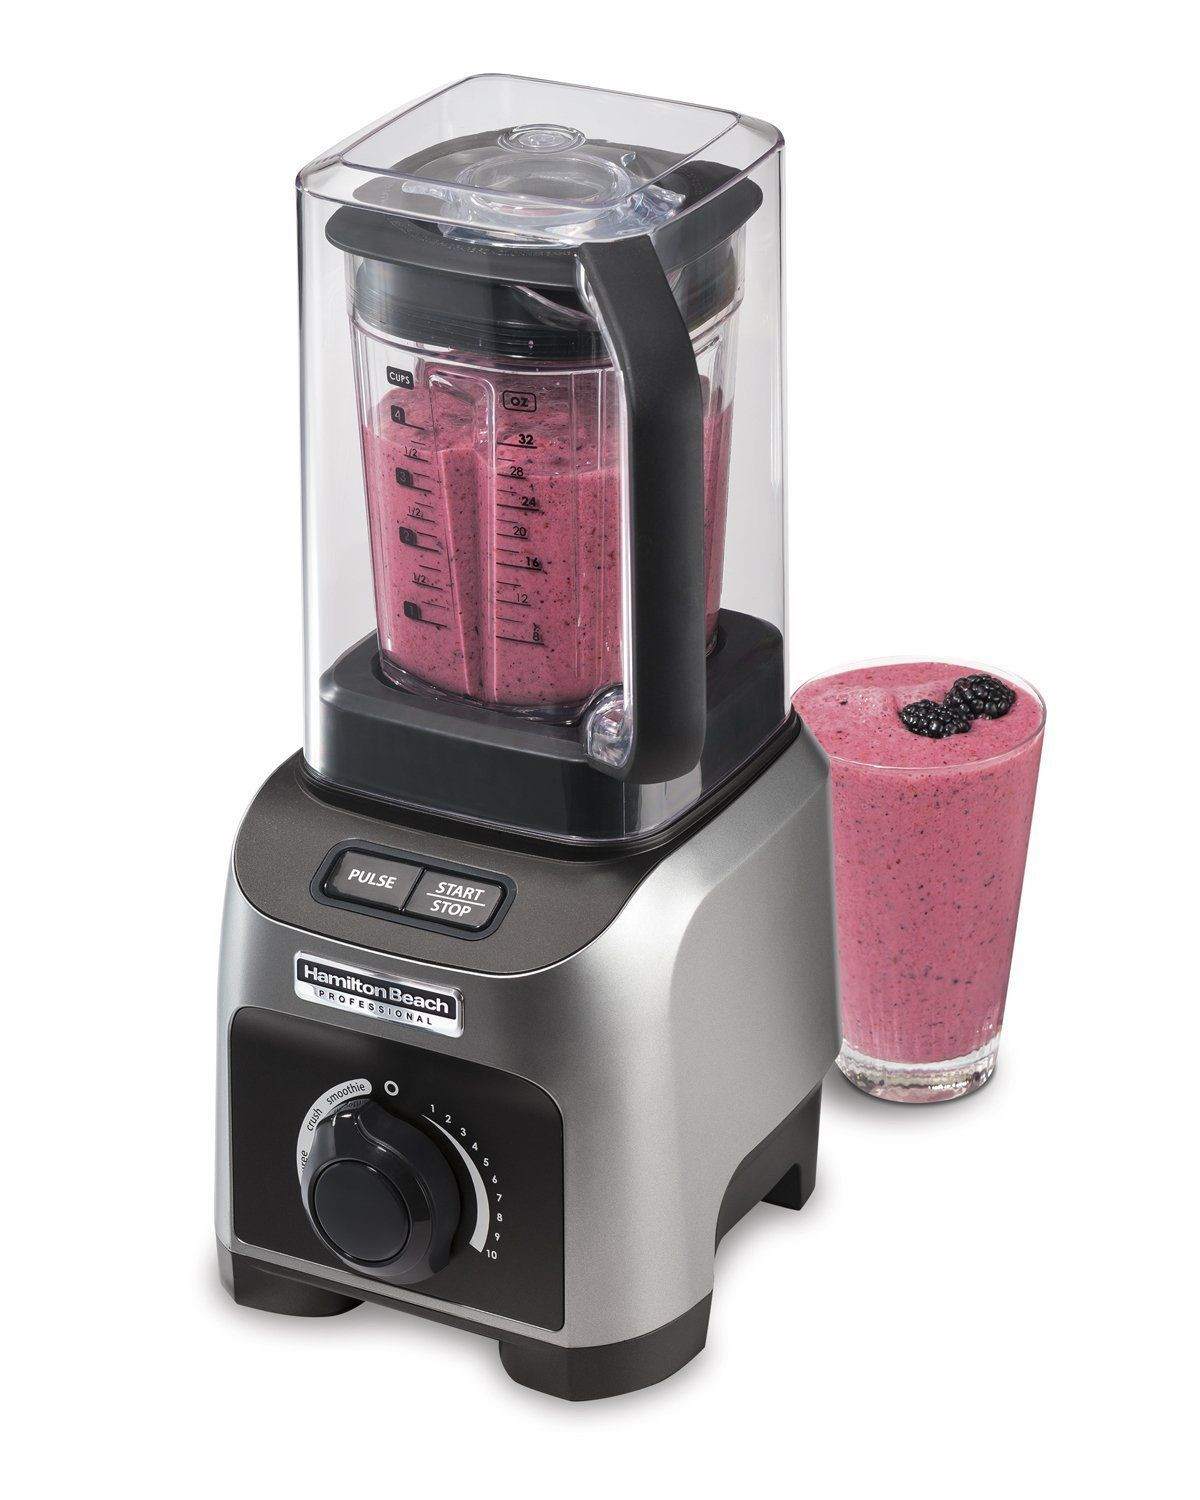 best personal blender for smoothies 2018